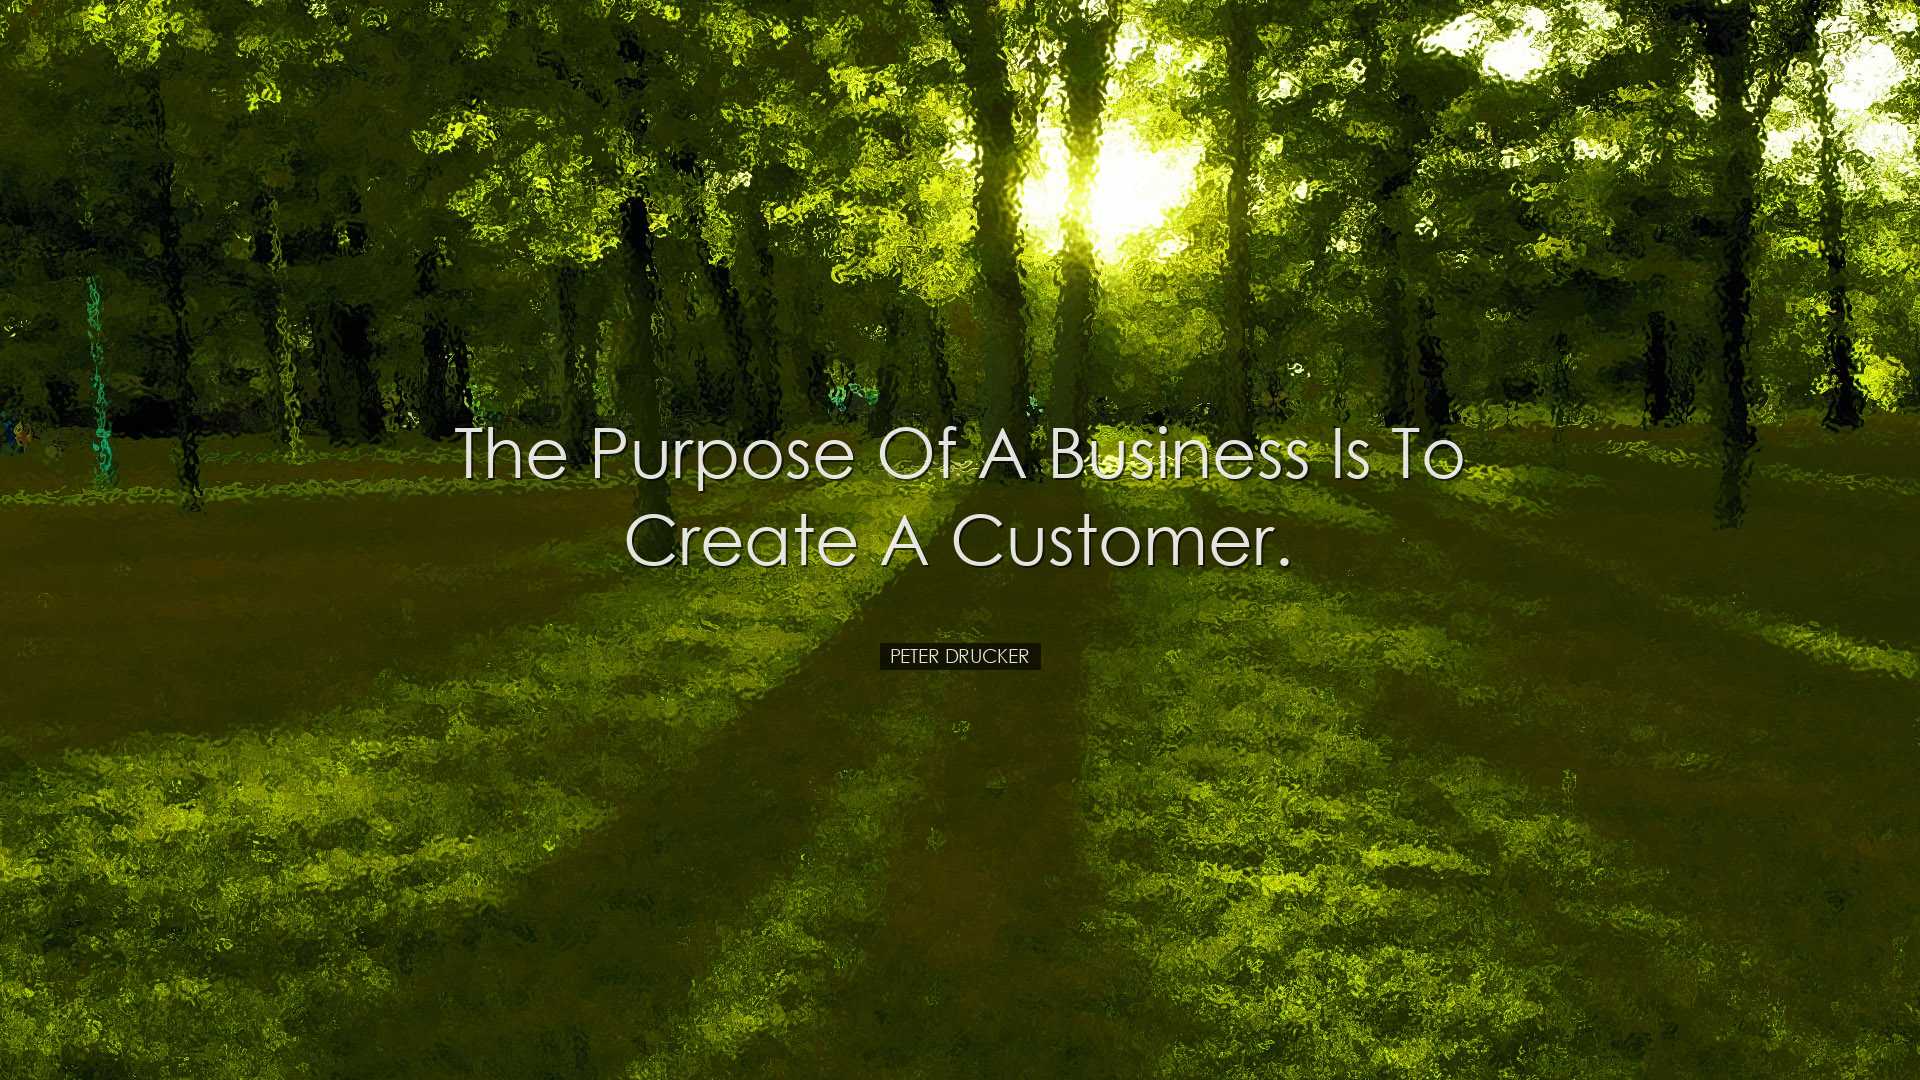 The purpose of a business is to create a customer. - Peter Drucker